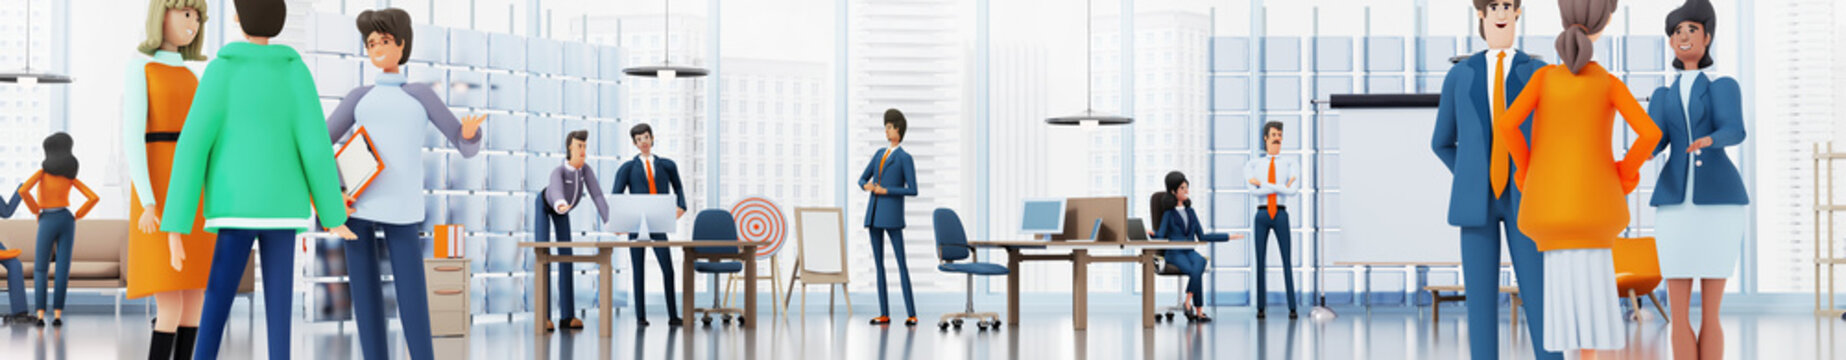 Wide panorama. Group of business people collaborating on a project, talking by a desk, sharing ideas. 3D rendering illustration